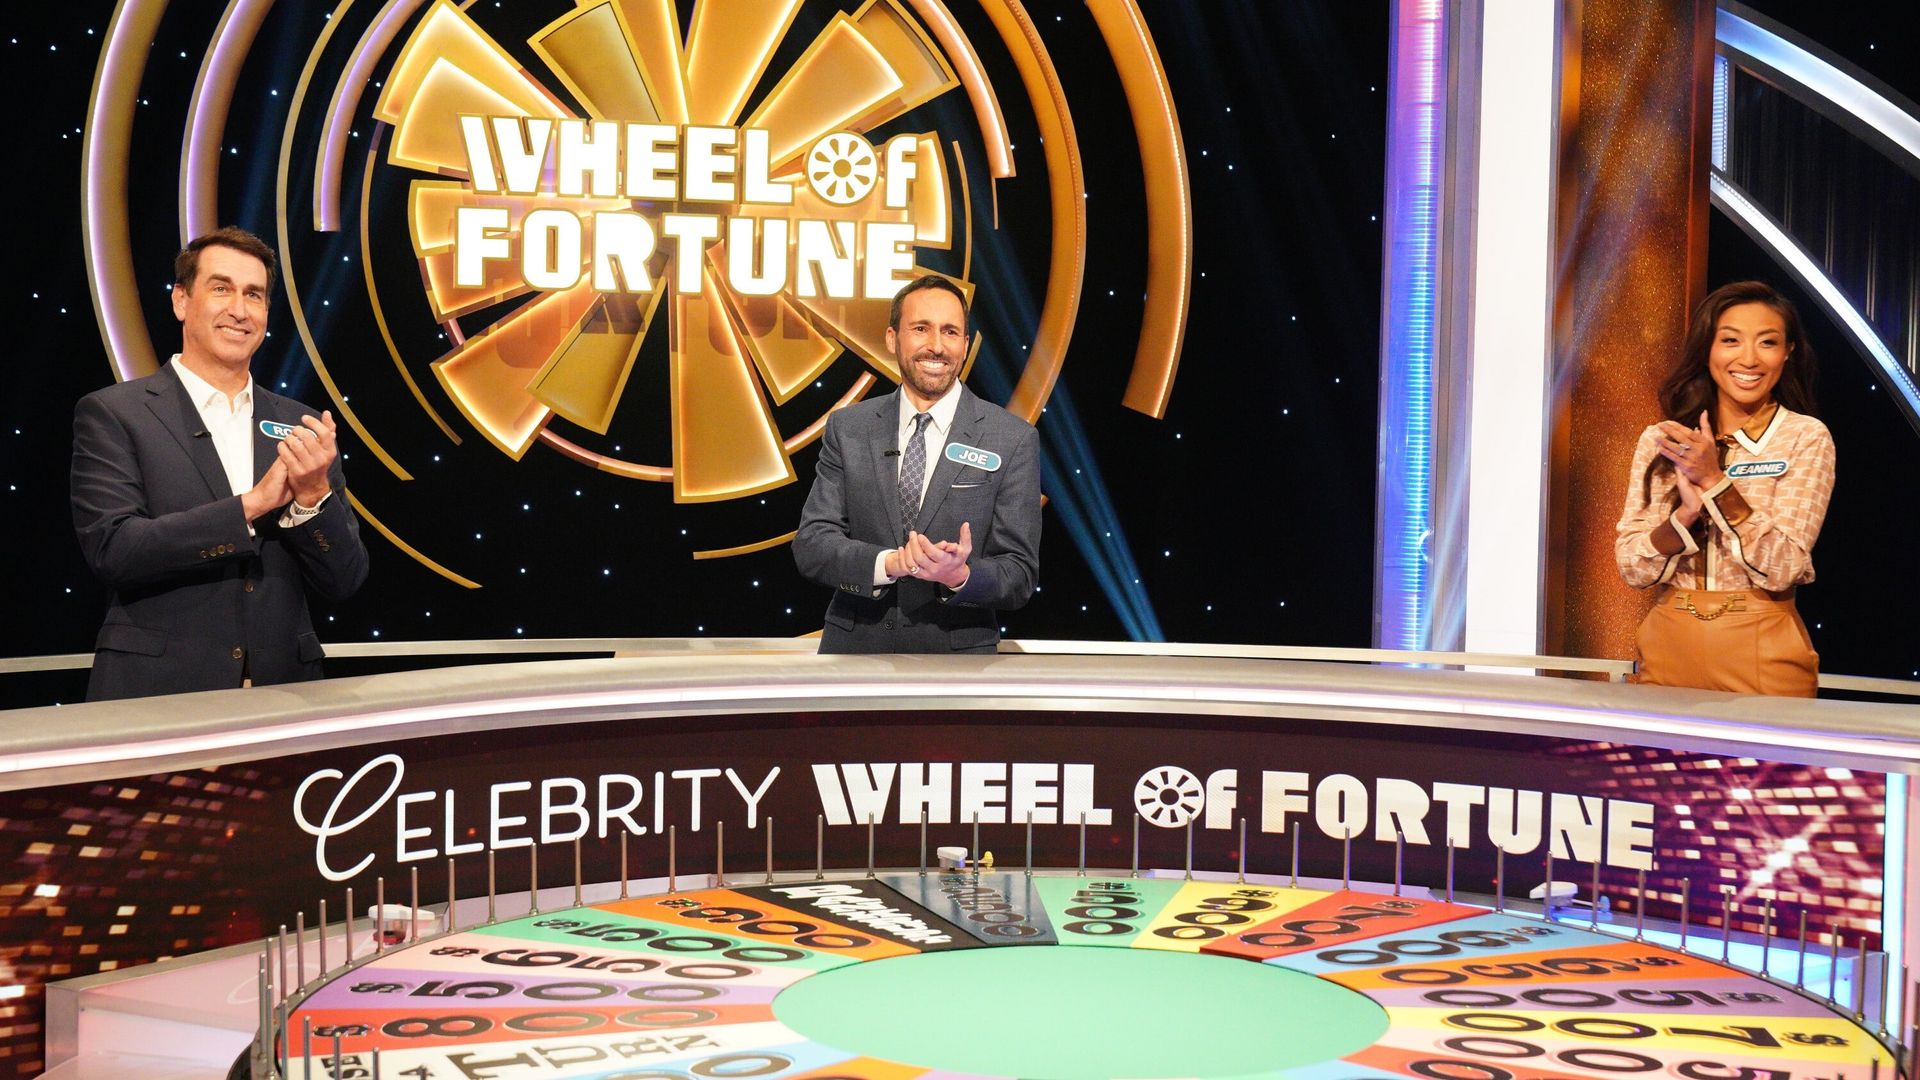 Celebrity Wheel of Fortune background